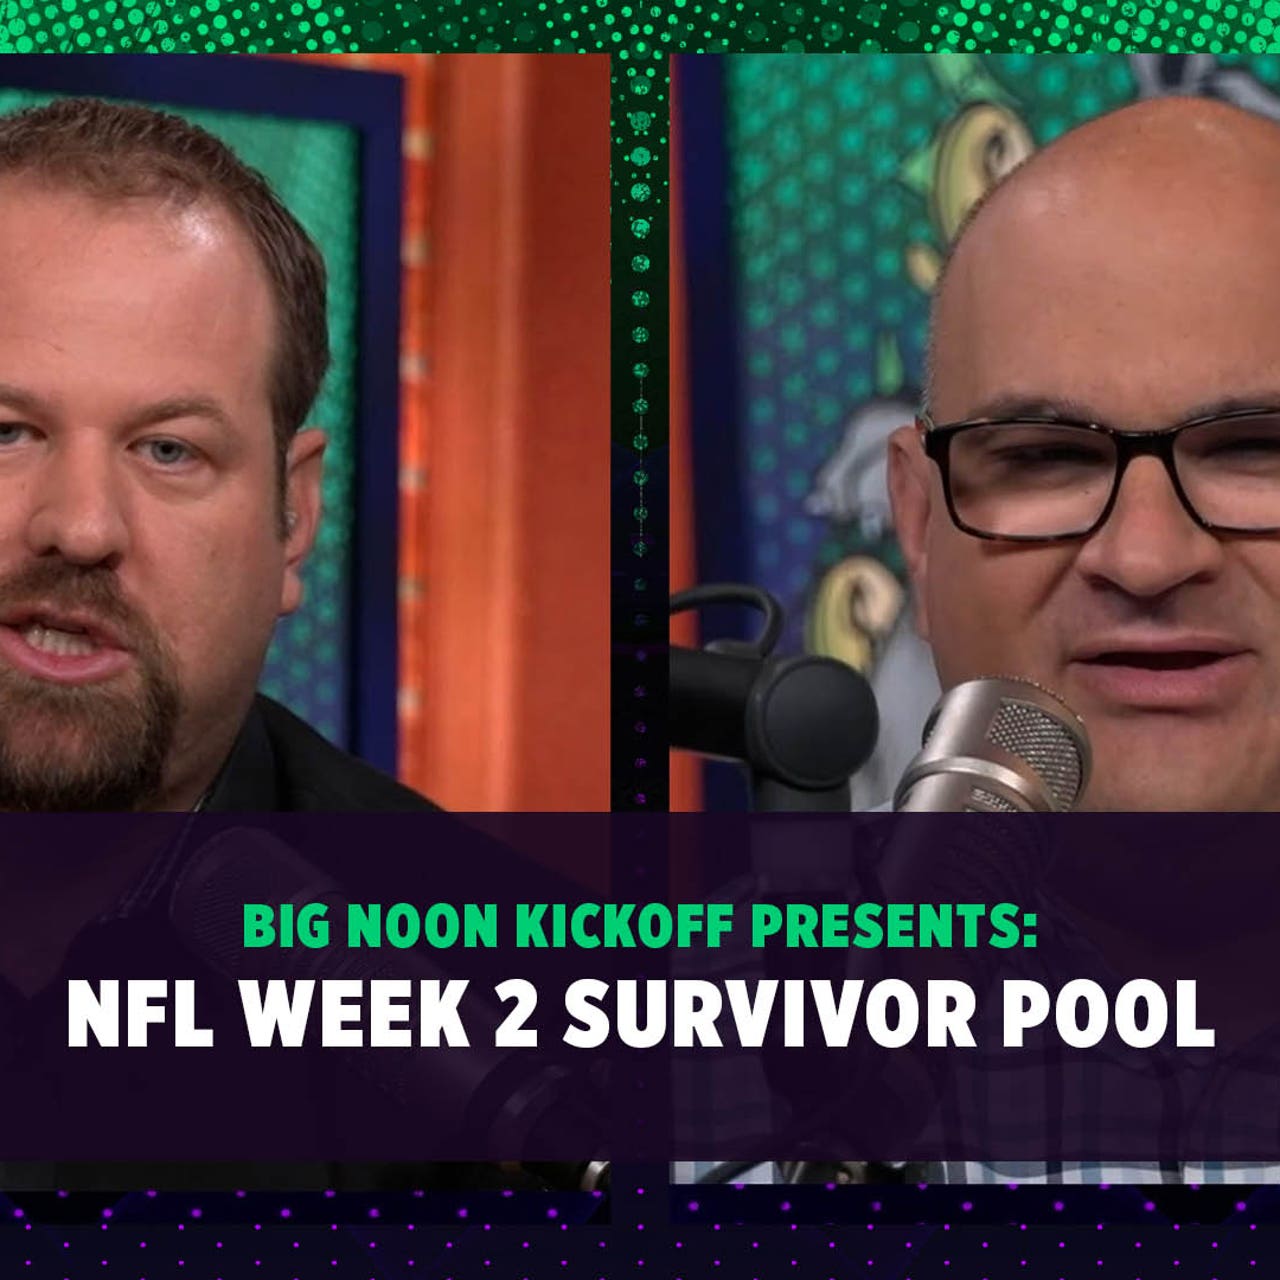 NFL Survivor Pool Week 2 top picks and strategy for the Lions, Chiefs and  more, Bears Bets